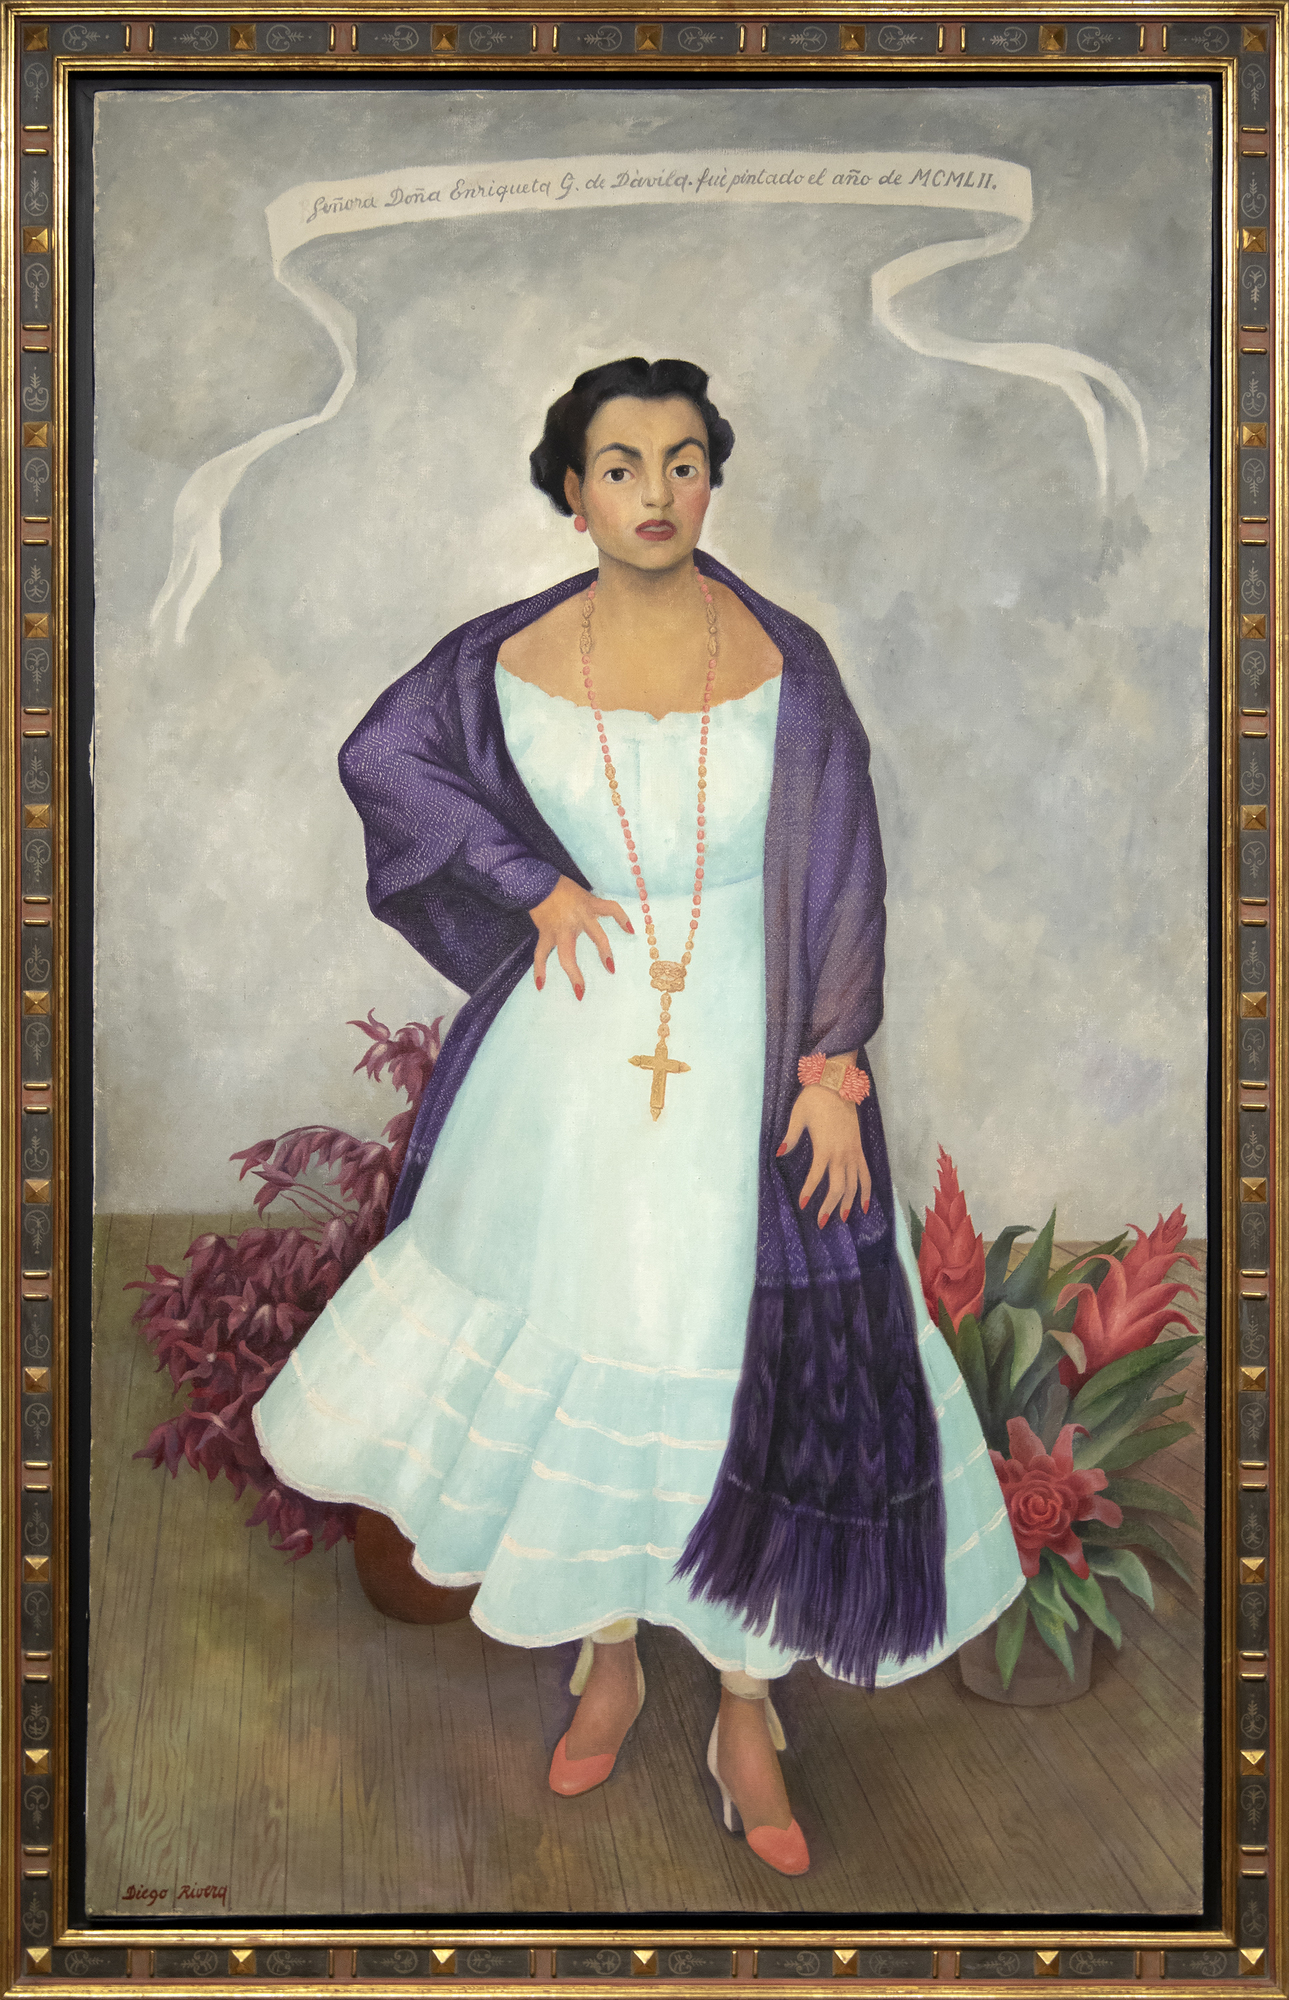 
<br>In Diego Rivera’s portrait of Enriqueta Dávila, the artist asserts a Mexicanidad, a quality of Mexican-ness, in the work along with his strong feelings towards the sitter. Moreover, this painting is unique amongst his portraiture in its use of symbolism, giving us a strong if opaque picture of the relationship between artist and sitter.
<br>
<br>Enriqueta, a descendent of the prominent Goldbaum family, was married to the theater entrepreneur, José María Dávila. The two were close friends with Rivera, and the artist initially requested to paint Enriqueta’s portrait. Enriqueta found the request unconventional and relented on the condition that Rivera paints her daughter, Enriqueta “Quetita”. Rivera captures the spirit of the mother through the use of duality in different sections of the painting, from the floorboards to her hands, and even the flowers. Why the split in the horizon of the floorboard? Why the prominent cross while Enriqueta’s family is Jewish? Even her pose is interesting, showcasing a woman in control of her own power, highlighted by her hand on her hip which Rivera referred to as a claw, further complicating our understanding of her stature.
<br>
<br>This use of flowers, along with her “rebozo” or shawl, asserts a Mexican identity. Rivera was adept at including and centering flowers in his works which became a kind of signature device. The flowers show bromeliads and roselles; the former is epiphytic and the latter known as flor de jamaica and often used in hibiscus tea and aguas frescas. There is a tension then between these two flowers, emphasizing the complicated relationship between Enriqueta and Rivera. On the one hand, Rivera demonstrates both his and the sitter’s Mexican identity despite the foreign root of Enriqueta’s family but there may be more pointed meaning revealing Rivera’s feelings to the subject. The flowers, as they often do in still life paintings, may also refer to the fleeting nature of life and beauty. The portrait for her daughter shares some similarities from the use of shawl and flowers, but through simple changes in gestures and type and placement of flowers, Rivera illuminates a stronger personality in Enriqueta and a more dynamic relationship as filtered through his lens.
<br>
<br>A closer examination of even her clothing reveals profound meaning. Instead of a dress more in line for a socialite, Rivera has Enriqueta in a regional dress from Jalisco, emphasizing both of their Mexican identities. On the other hand, her coral jewelry, repeated in the color of her shoes, hints at multiple meanings from foreignness and exoticism to protection and vitality. From Ancient Egypt to Classical Rome to today, coral has been used for jewelry and to have been believed to have properties both real and symbolic. Coral jewelry is seen in Renaissance paintings indicating the vitality and purity of woman or as a protective amulet for infants. It is also used as a reminder, when paired with the infant Jesus, of his future sacrifice. Diego’s use of coral recalls these Renaissance portraits, supported by the plain background of the painting and the ribbon indicating the maker and date similar to Old Master works.
<br>
<br>When combined in the portrait of Enriqueta, we get a layered and tense building of symbolism. Rivera both emphasizes her Mexican identity but also her foreign roots. He symbolizes her beauty and vitality but look closely at half of her face and it is as if Rivera has painted his own features onto hers. The richness of symbolism hints at the complex relationship between artist and sitter.